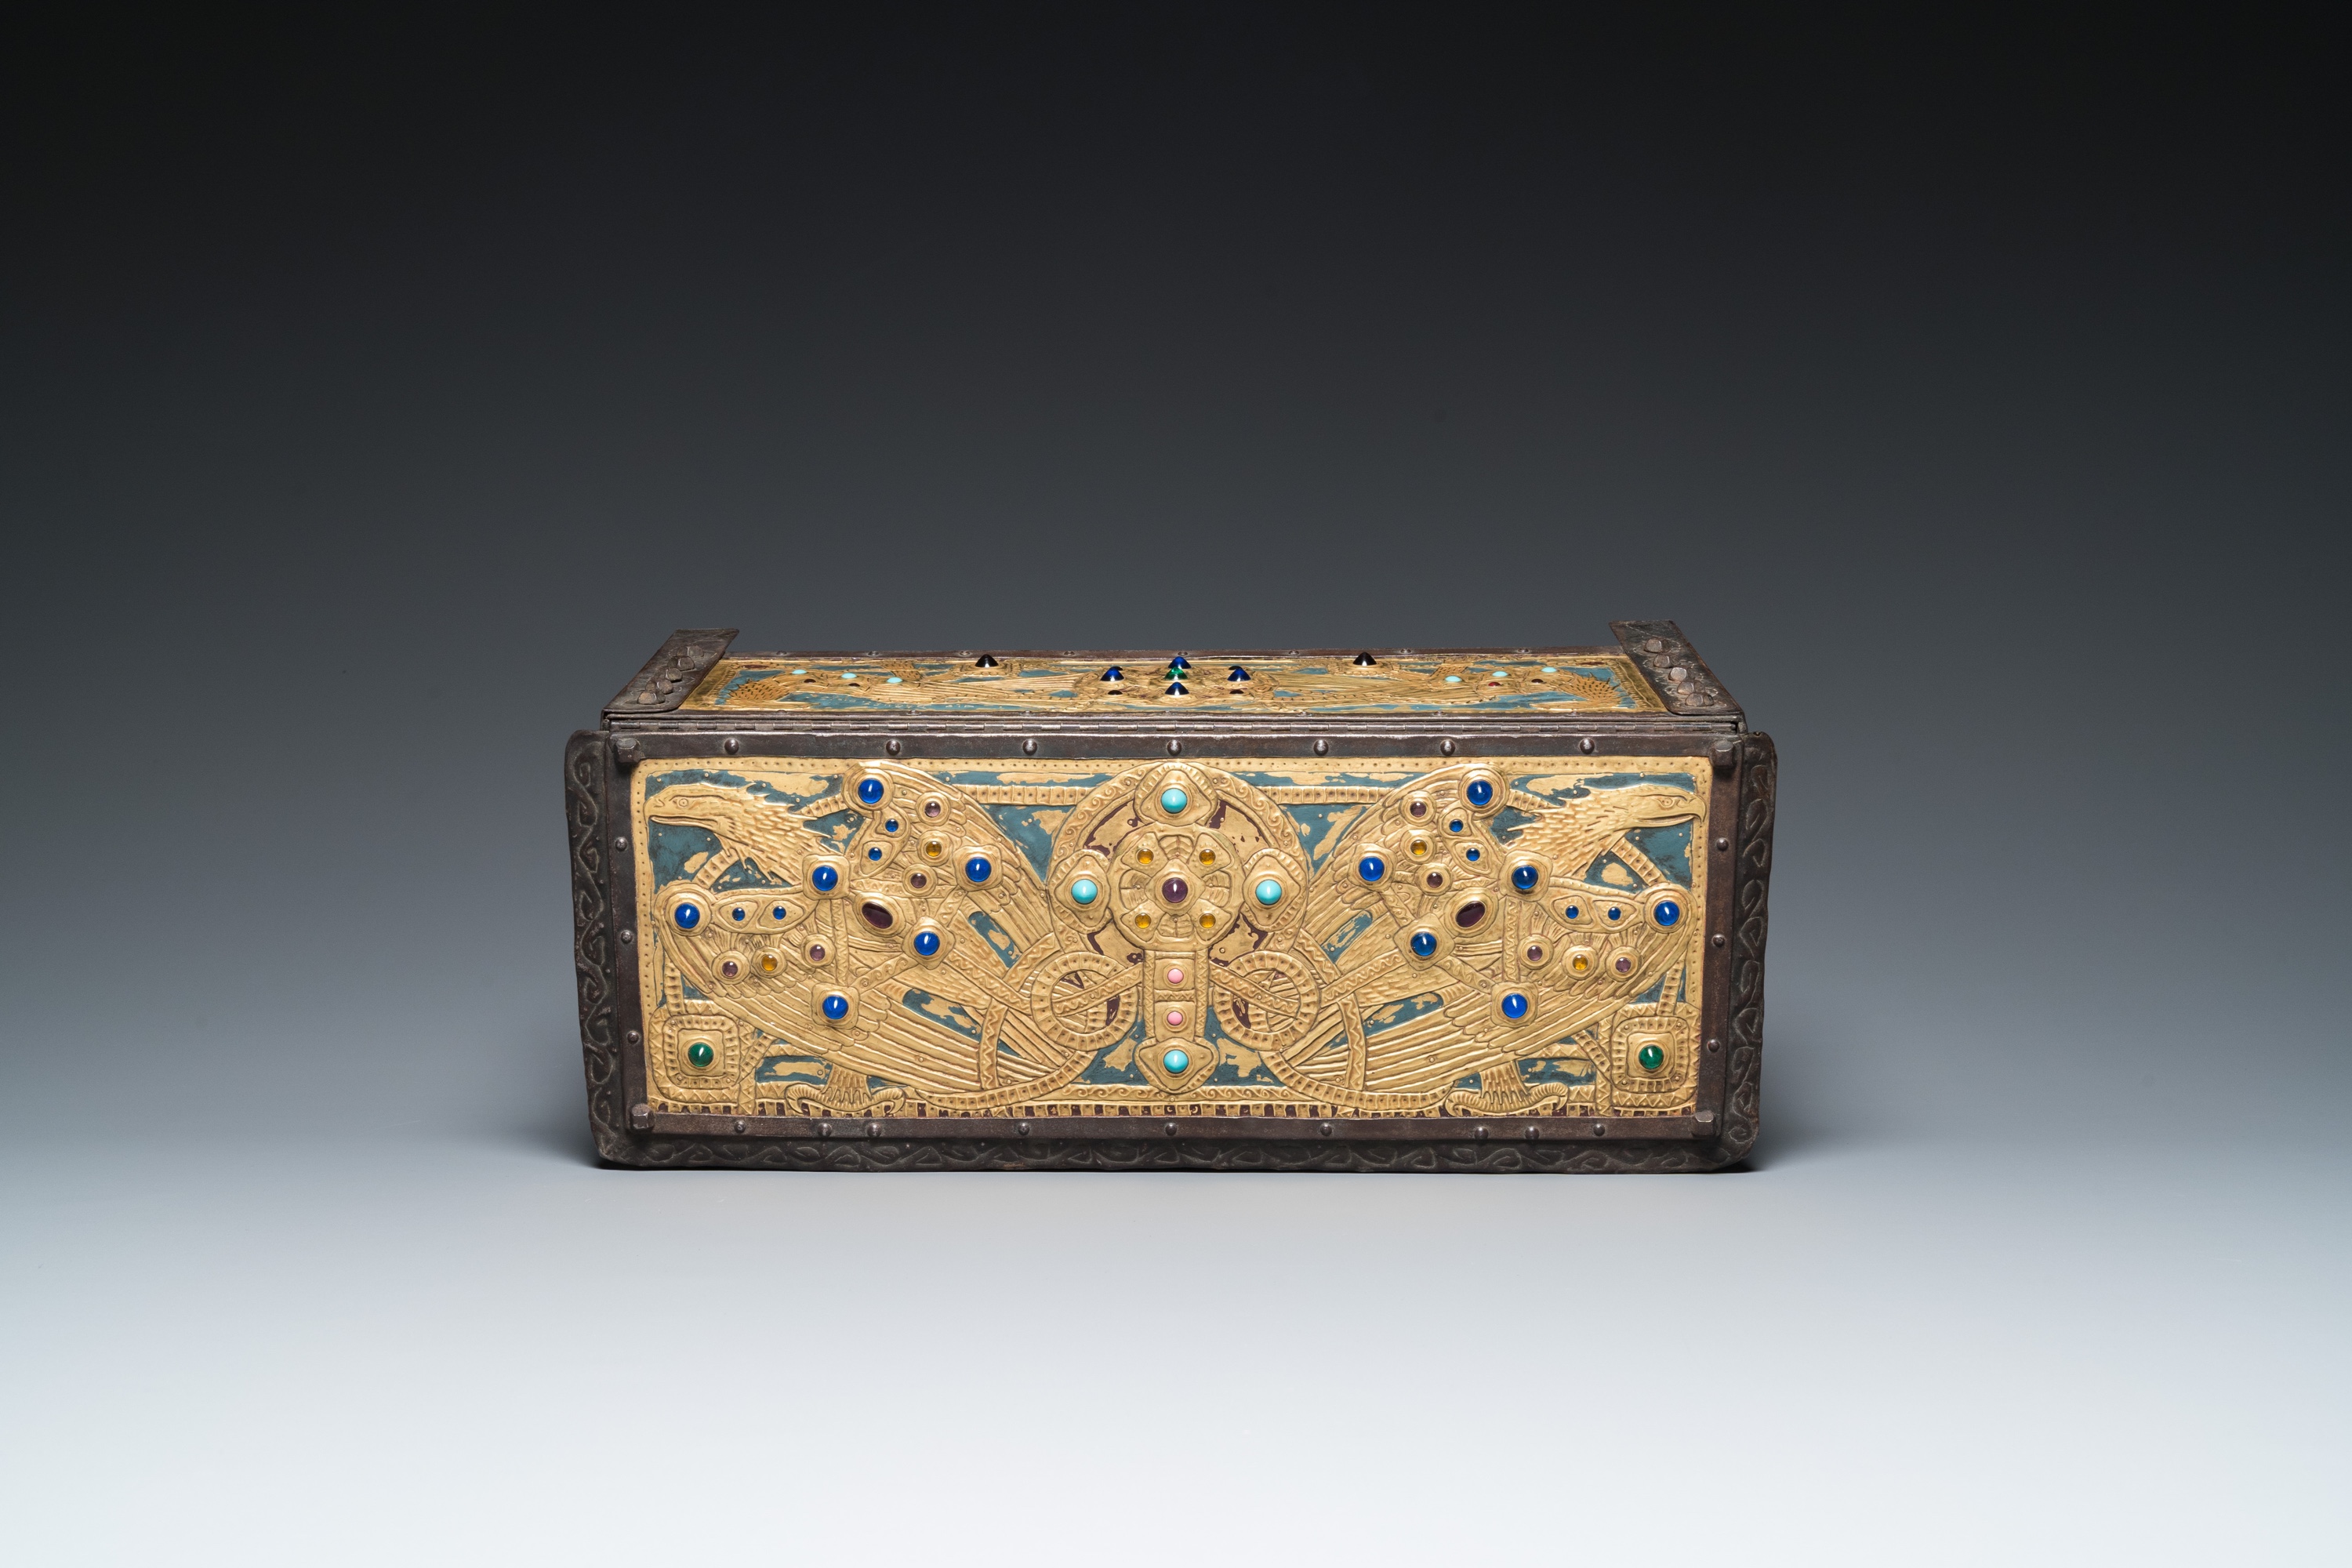 Alfred Daguet (Paris, 1875-1942): A Gothic revival repoussŽ brass and copper-mounted metal box with - Image 7 of 10